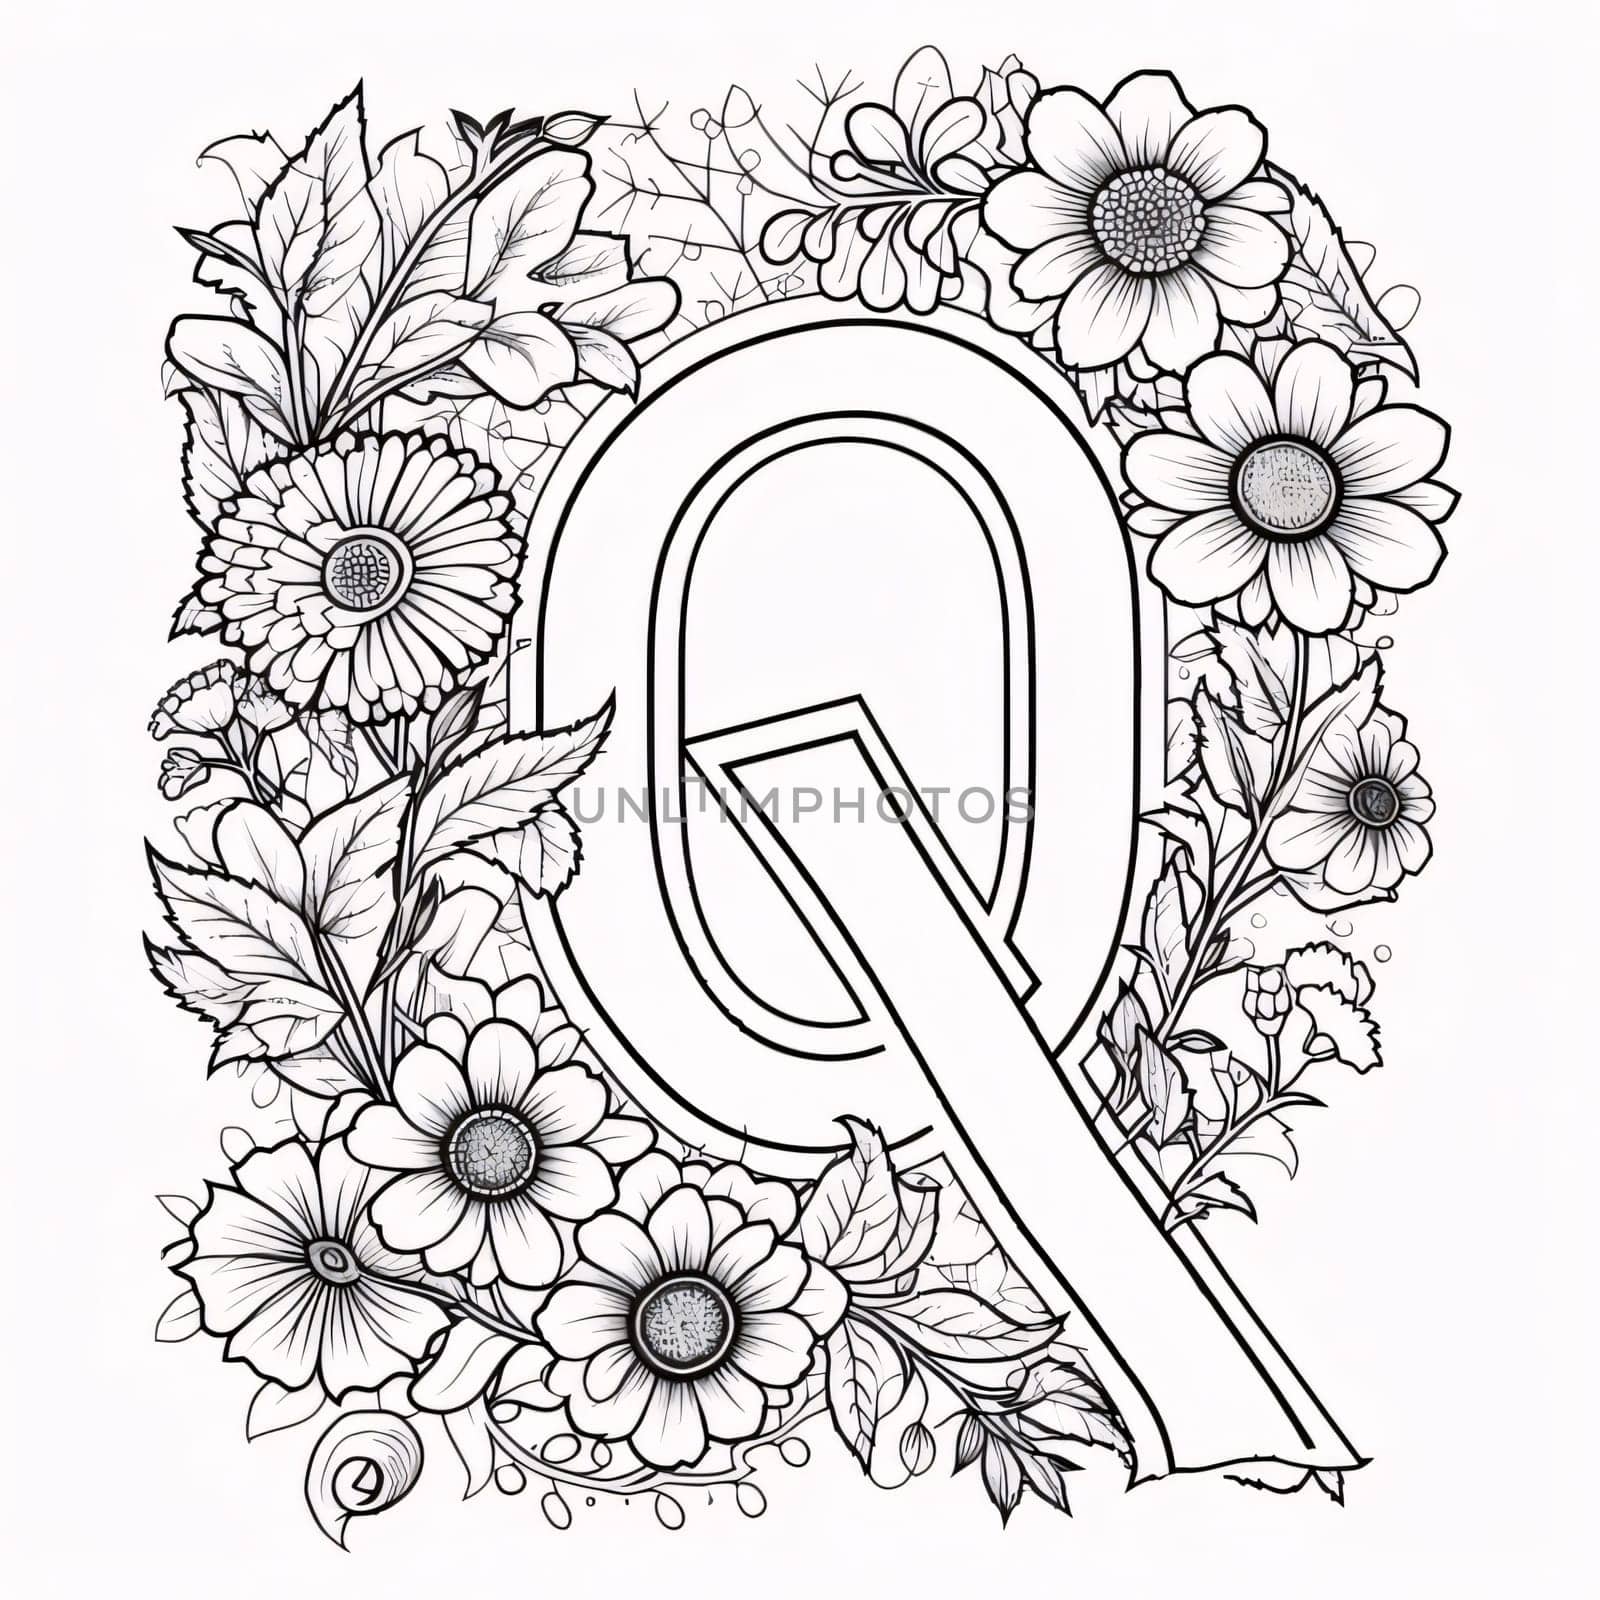 Graphic alphabet letters: Hand drawn letter Q with flowers and leaves. Vector illustration for coloring book.